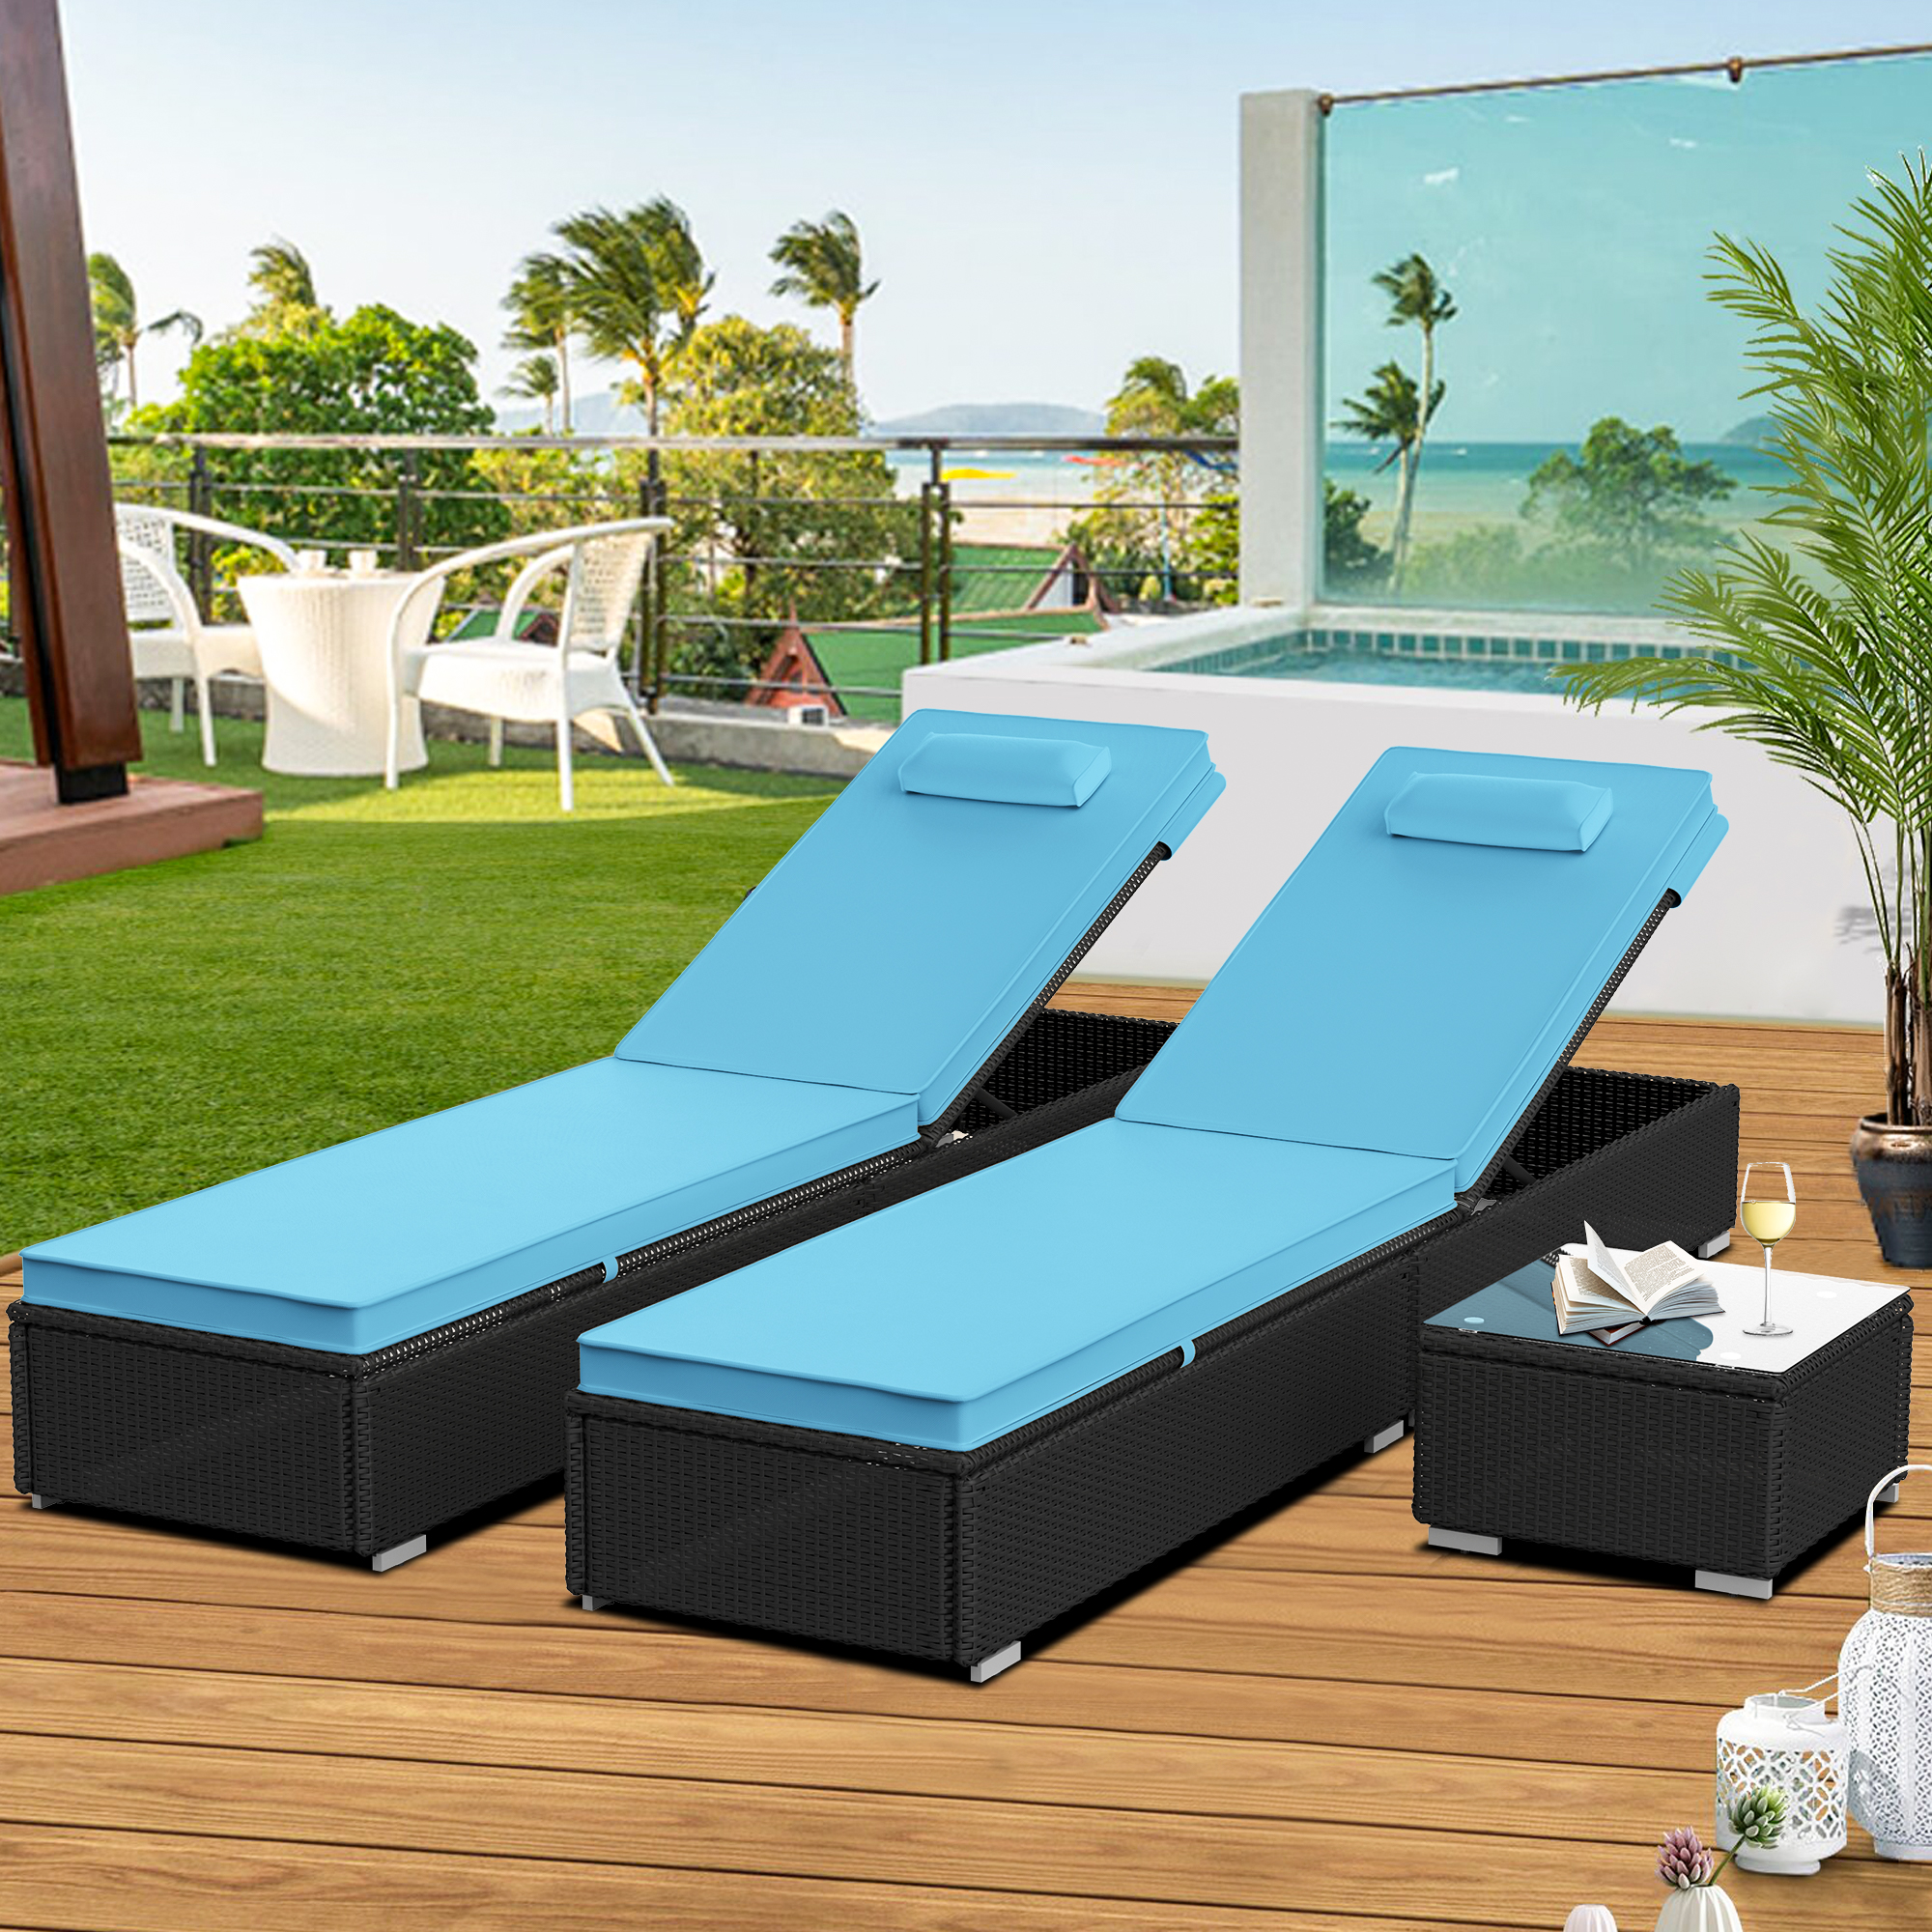 Chaise Lounge Set, Outdoor Lounge Chair with 5 Backrest Angles and Coffee Table, Elegant Chaise Lounge Chair, Patio Reclining Chairs Furniture for Poolside, Deck, Backyard, JA2910 - image 2 of 7